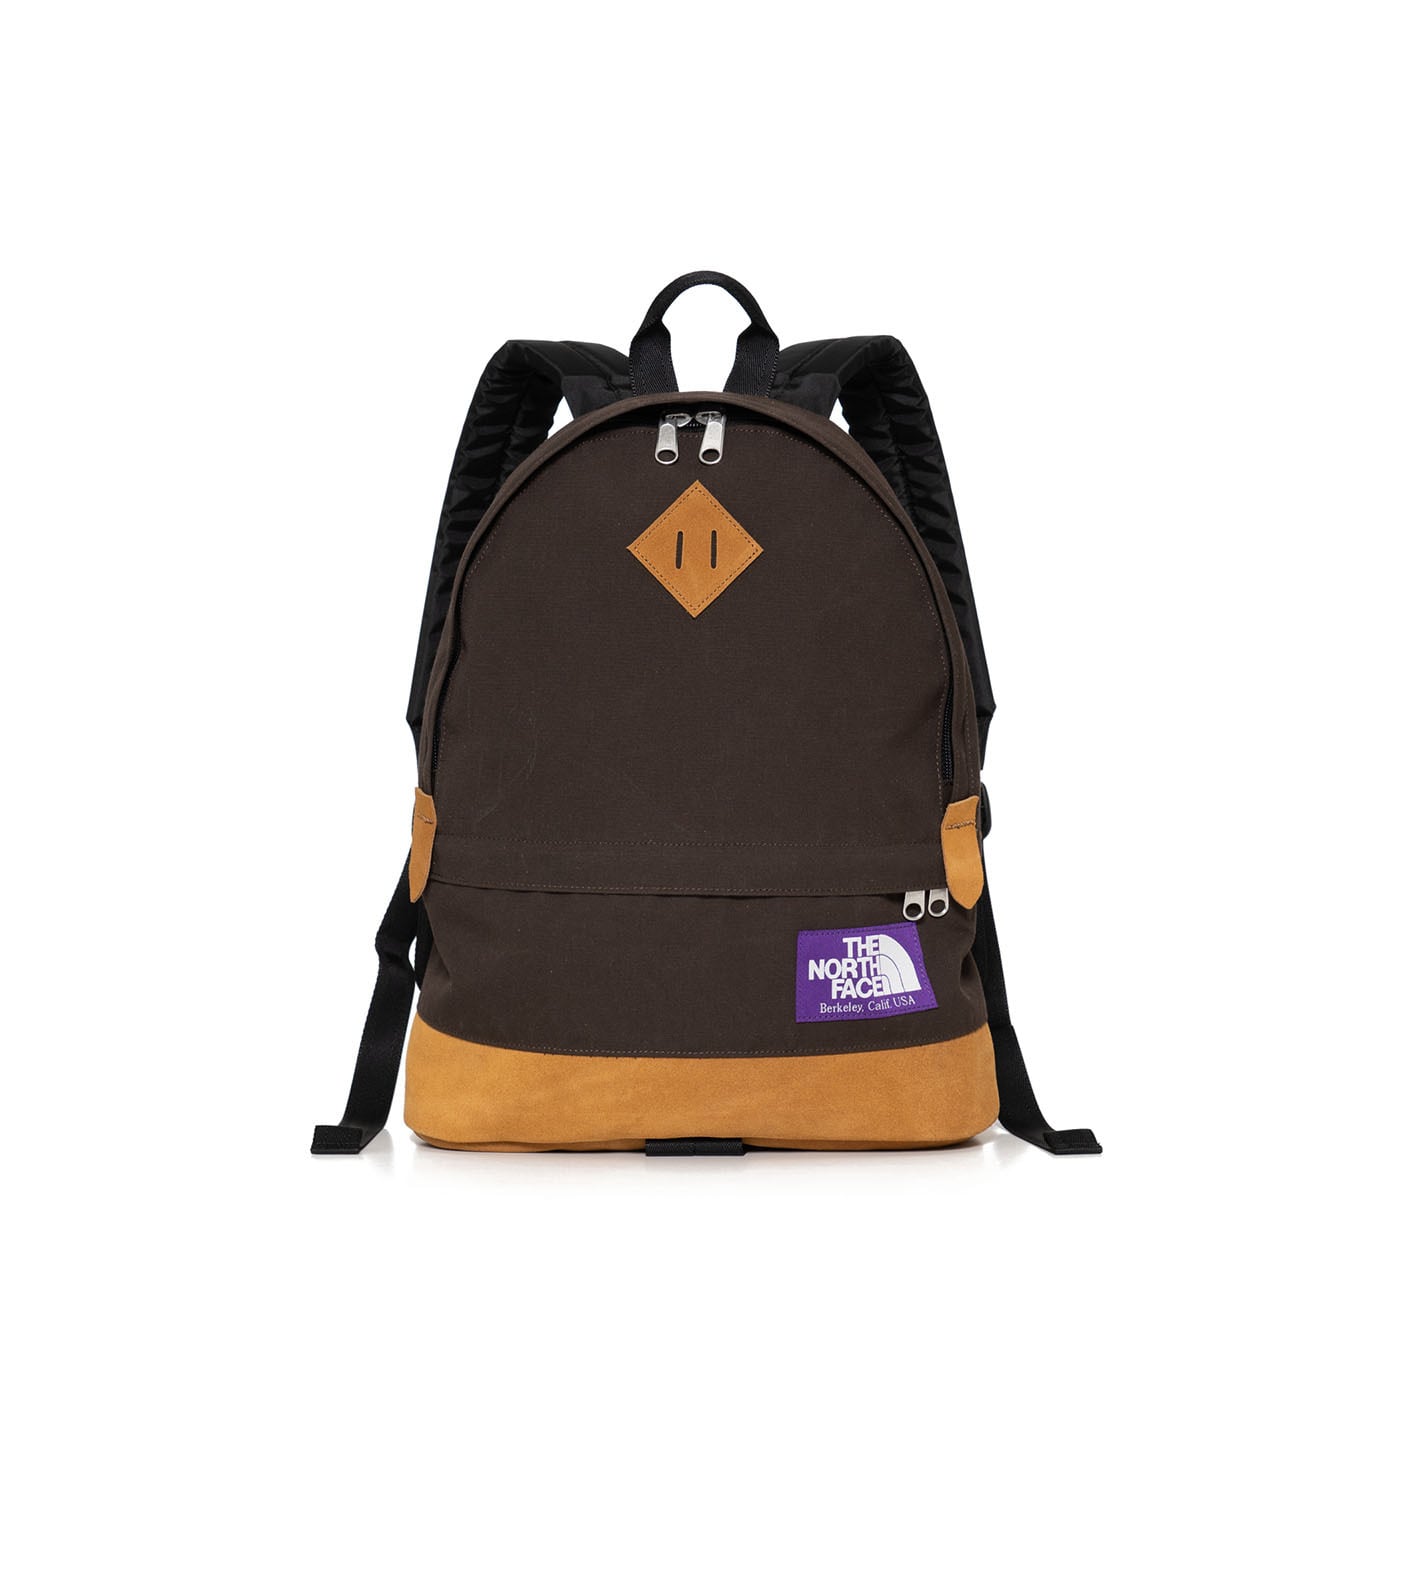 THE NORTH FACE PURPLE LABEL Medium Day Pack NN7507N BR(Brown) | ～ c o u j i  ～ powered by BASE